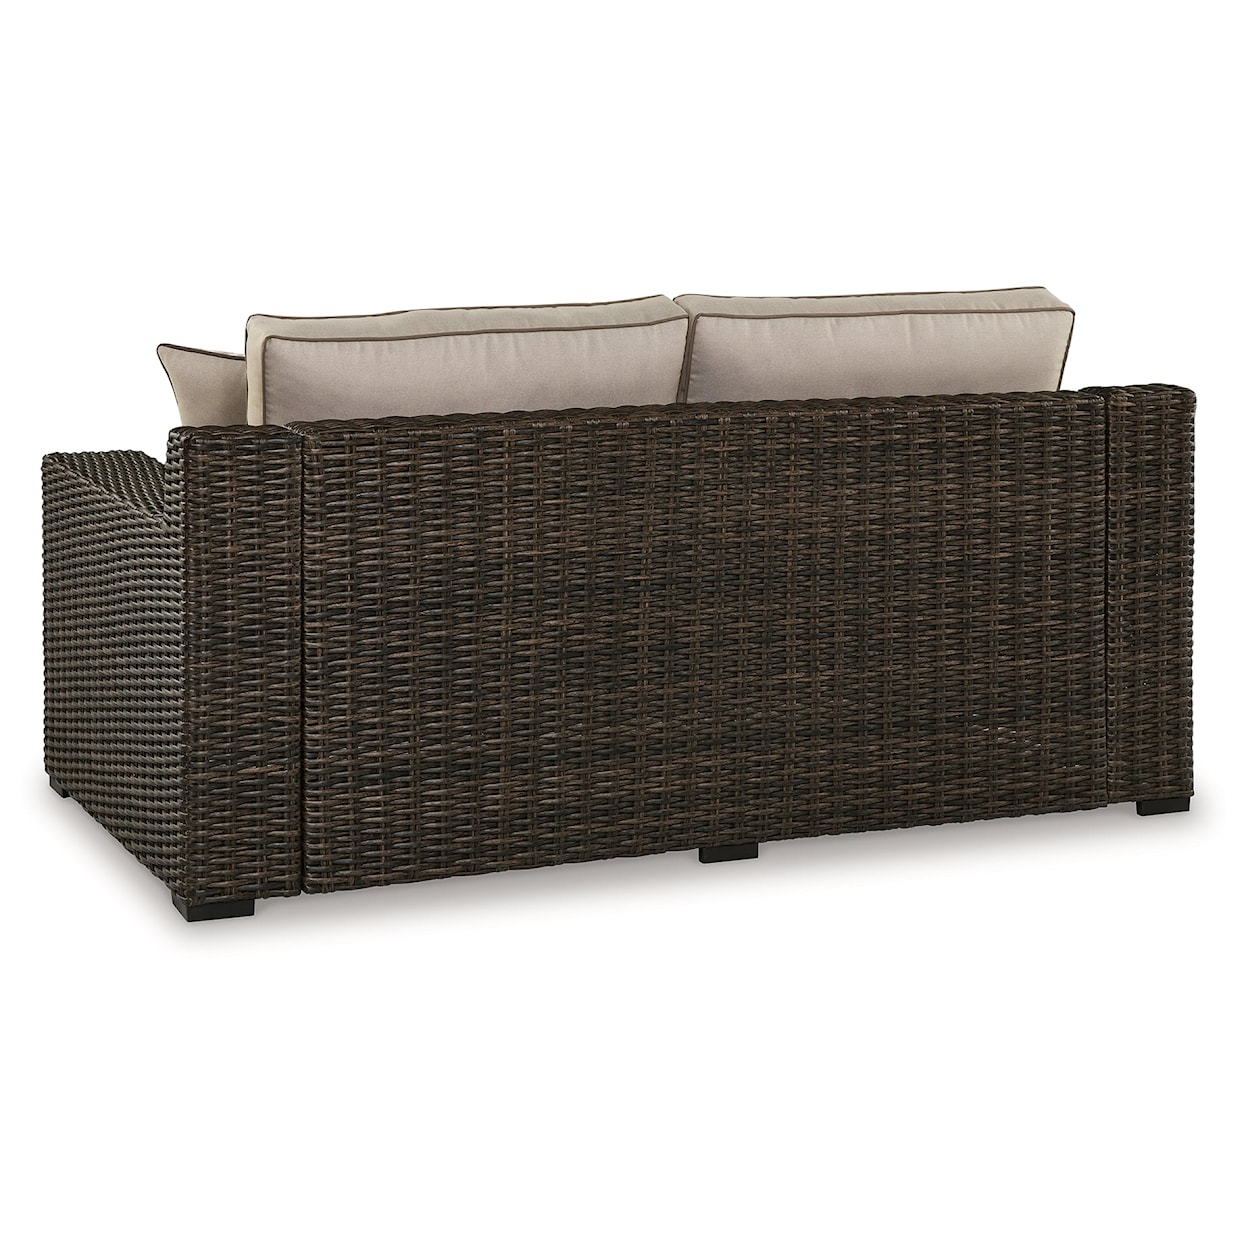 Signature Design by Ashley Coastline Bay Outdoor Loveseat With Cushion